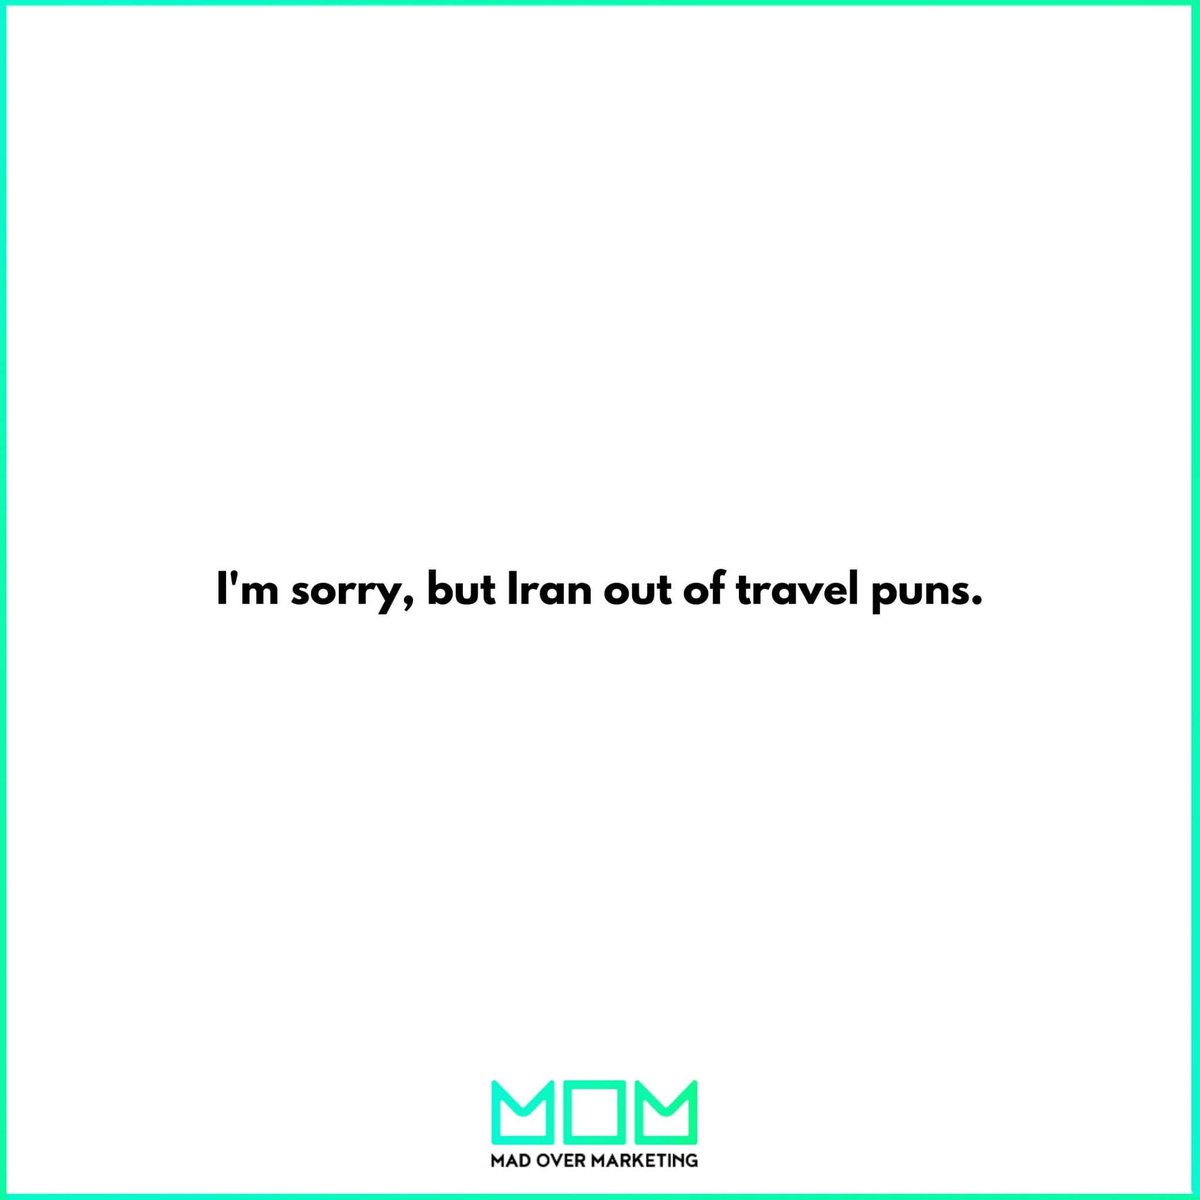 We asked users to describe their mood using travel puns, and boy they did not disappoint. (2/2)